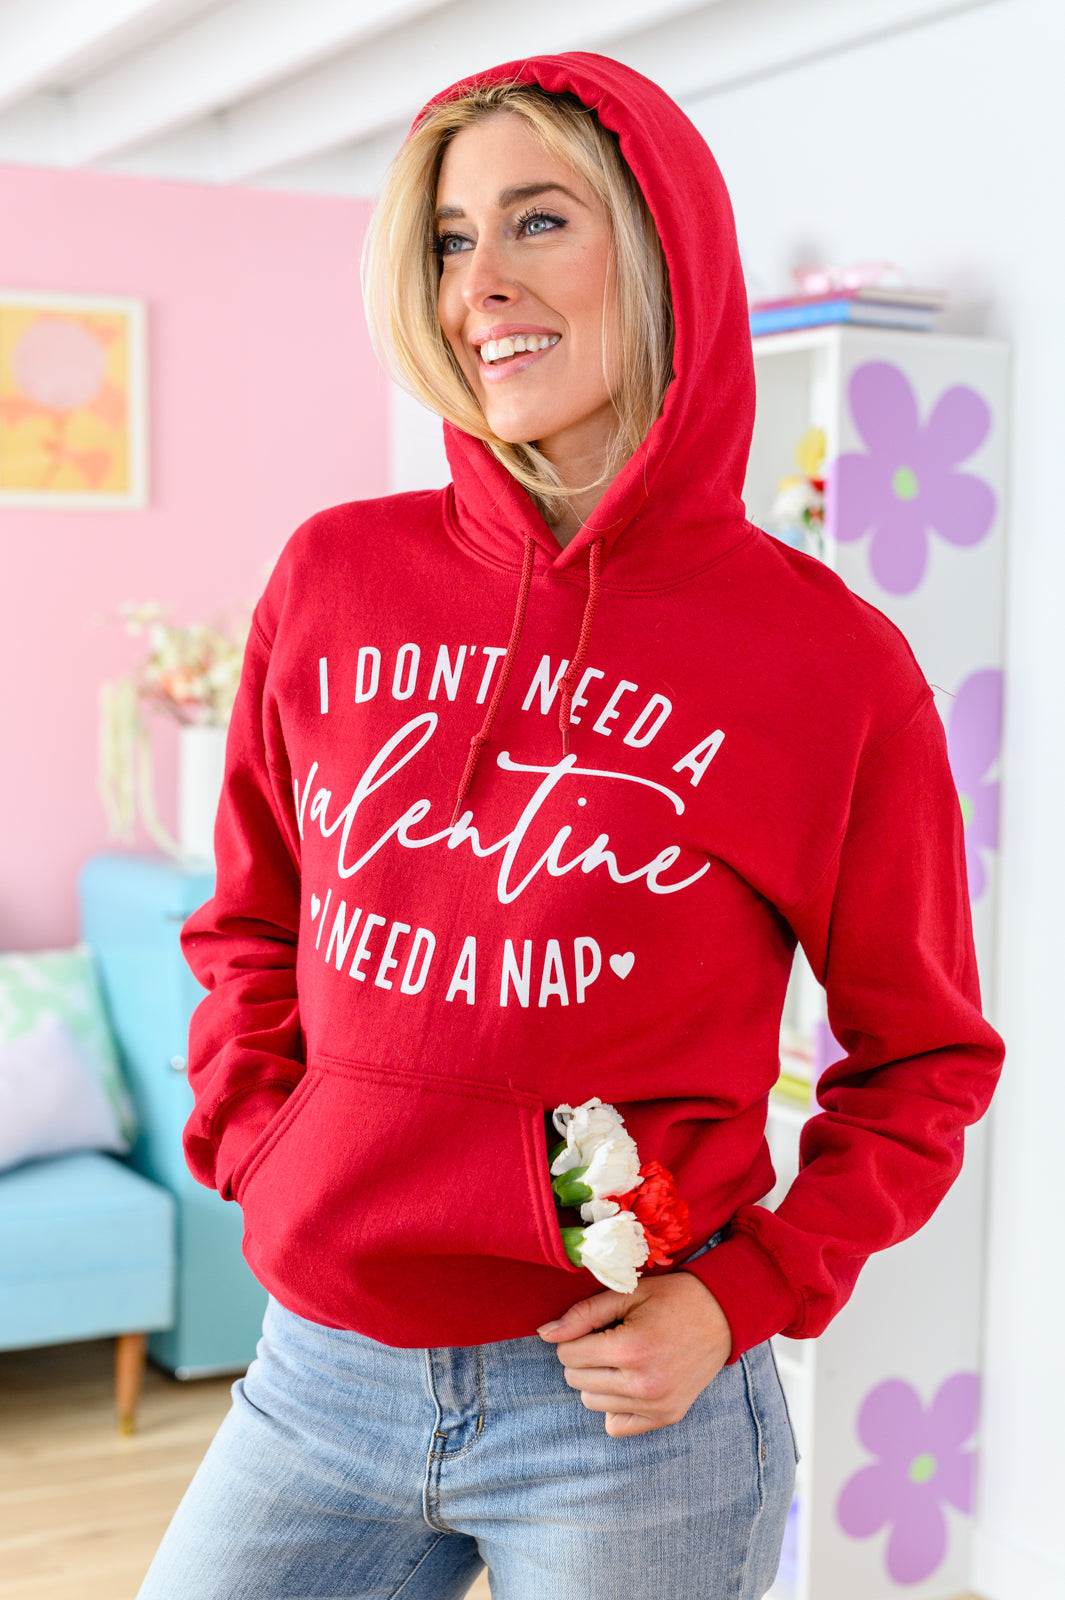 I Don't Need A Valentine Hoodie - FamFancy Boutique